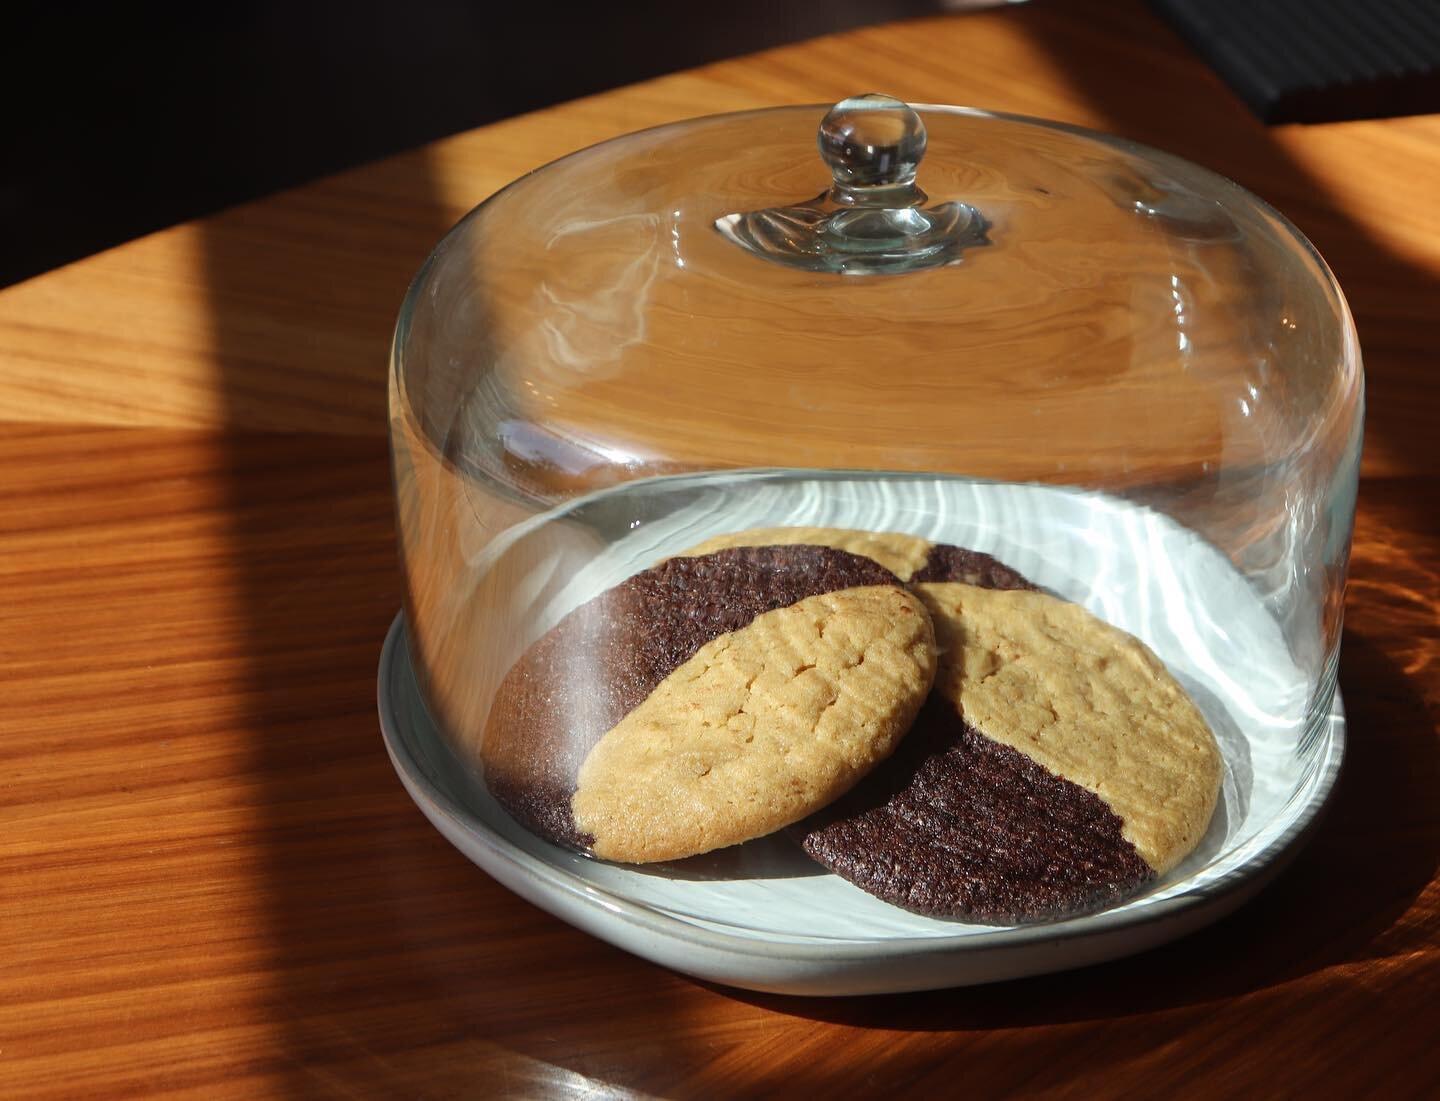 Enjoy the cozy rainy weather 🌧️ with a tasty treat, Brown Butter style!👨🏾&zwj;🍳🧈🍪 

Featuring the Peanut Butter Chocolate Cookie.

#blackownedbusiness #cookiecravings #kingarthurflour #cookielovers #callebaut #delicioustreats